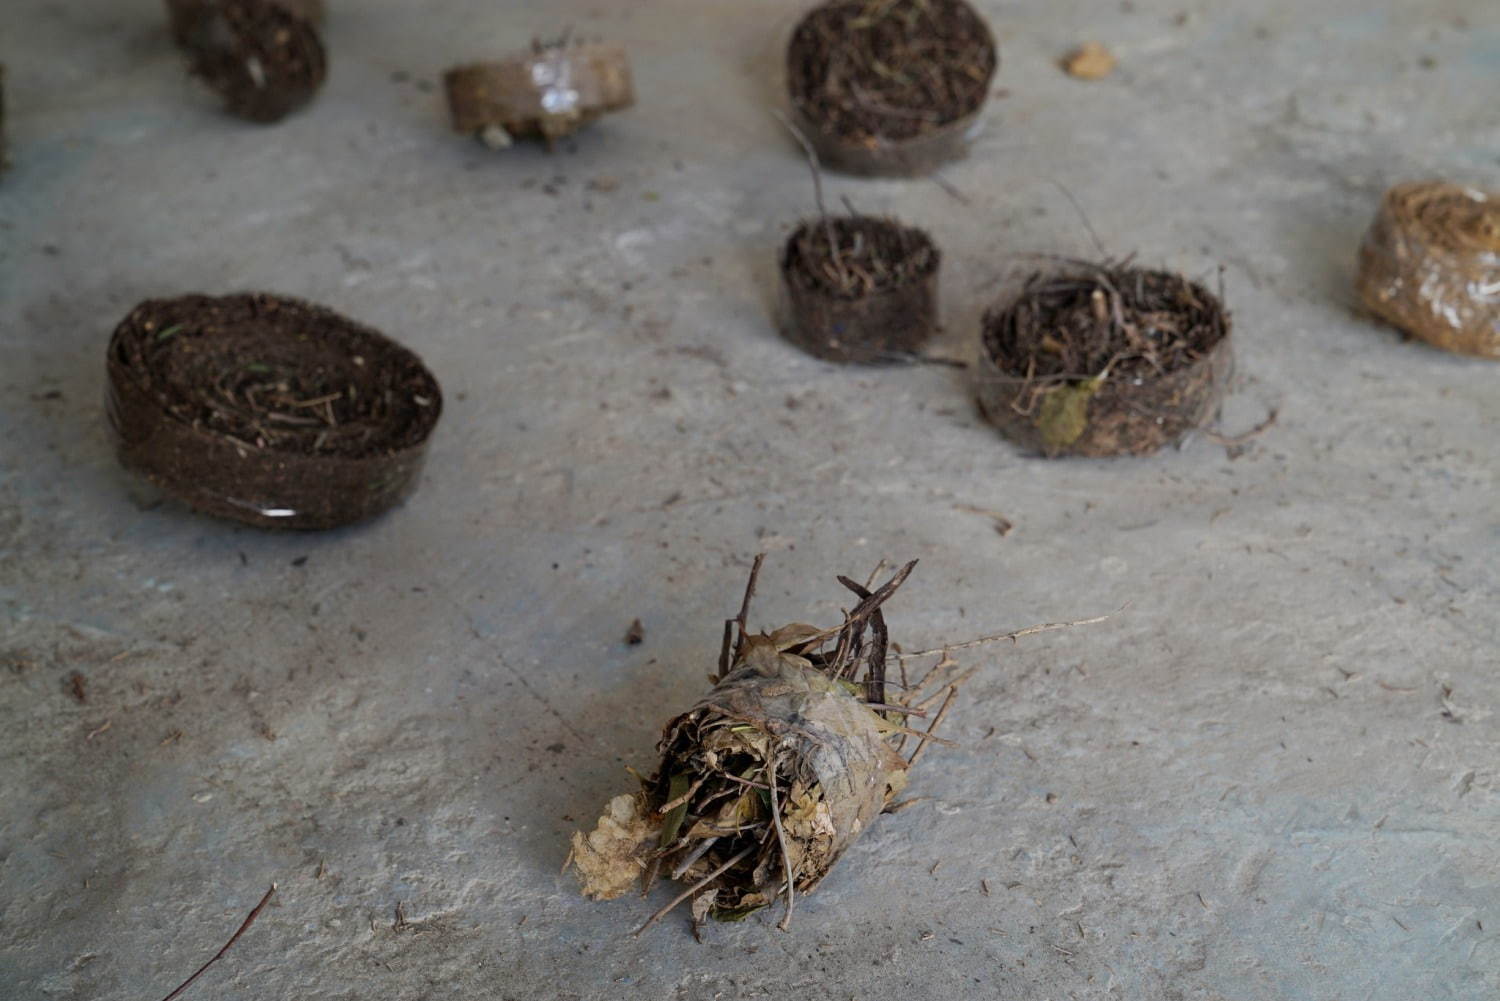 Nest (research material) | Tape and earth, twigs, leaves and pebbles | 2019 | © Ismaïl Bahri, Courtesy of the artist